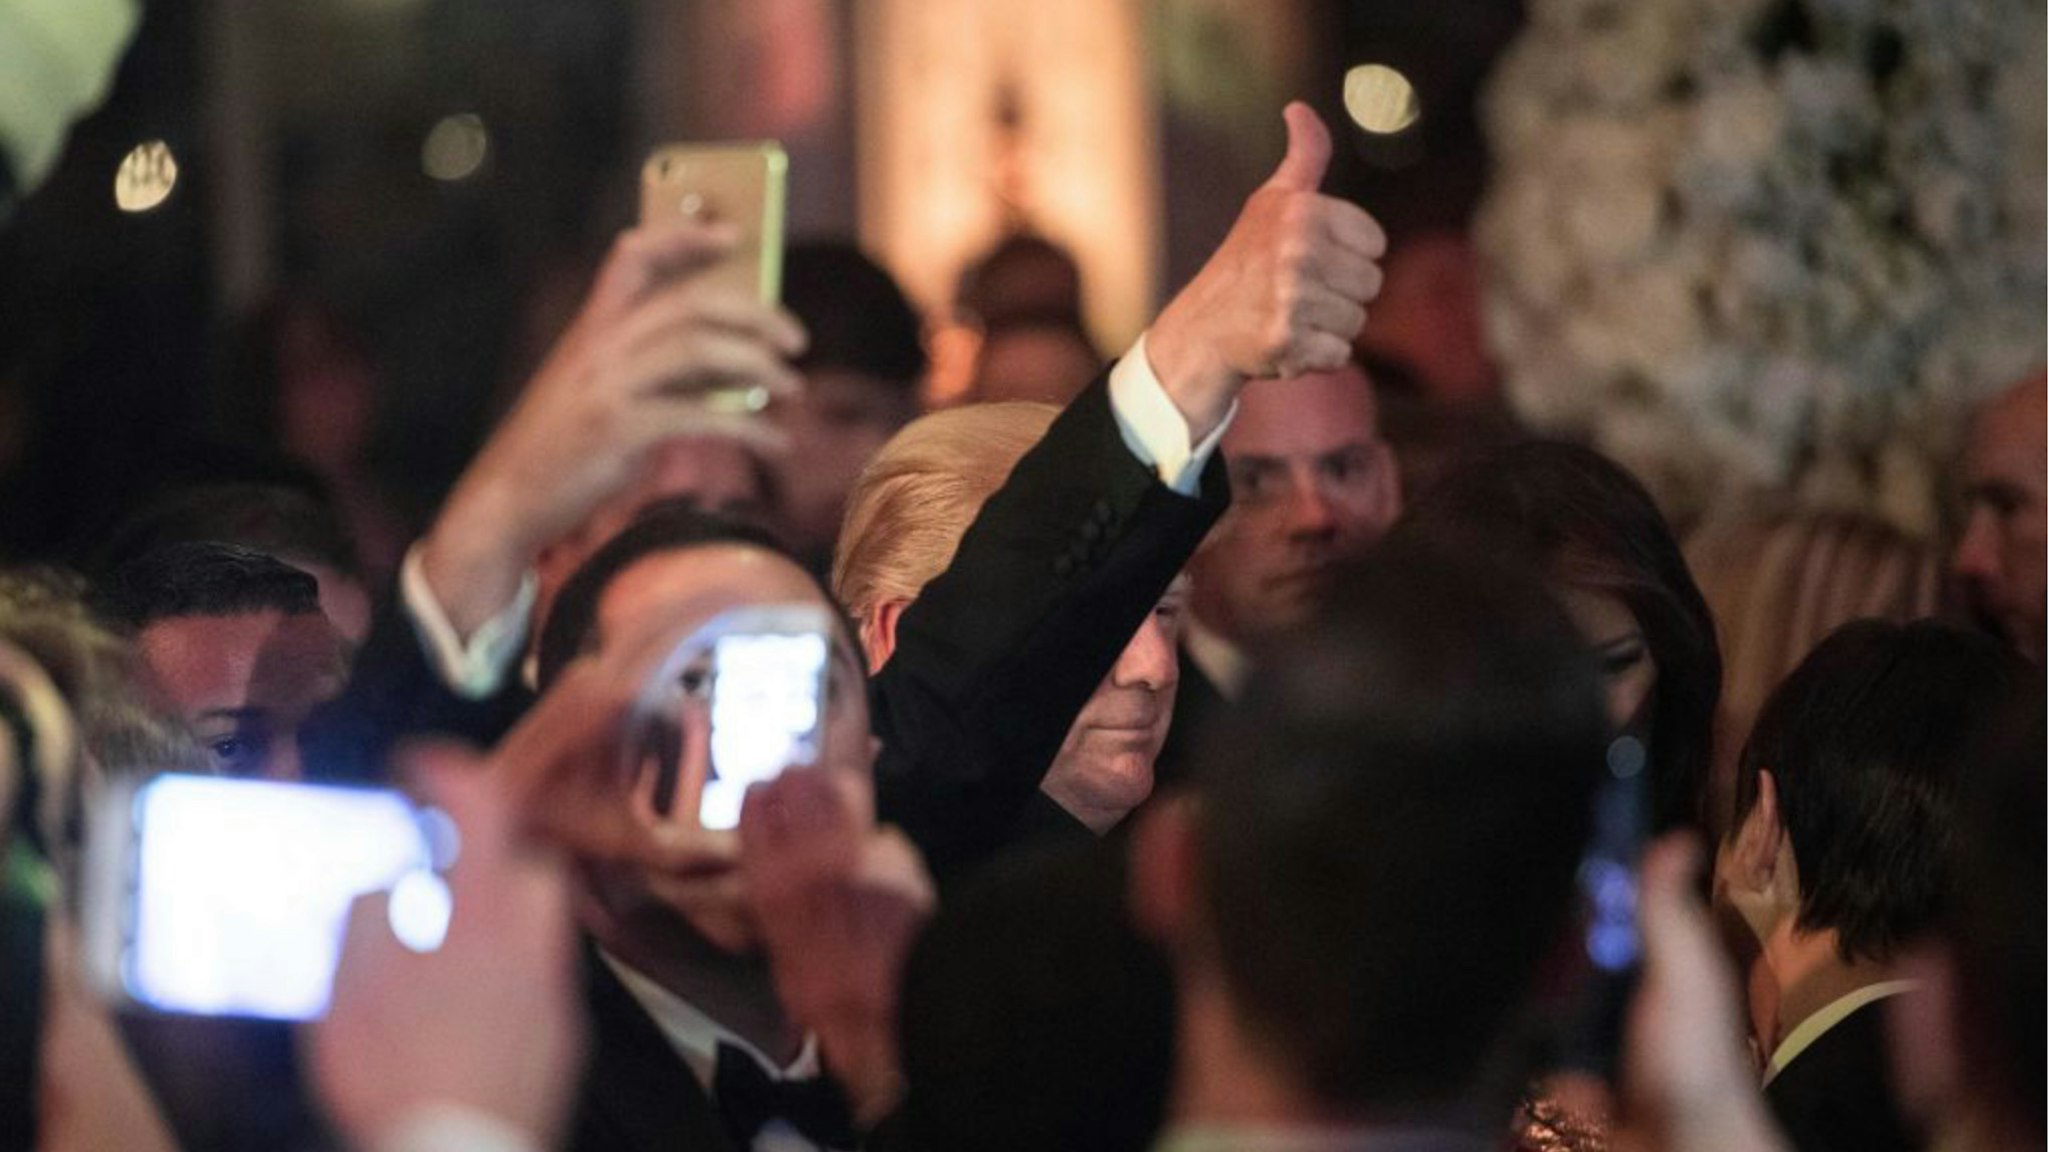 US President Donald Trump arrives at a new year's party at Trump's Mar-a-Lago resort in Palm Beach, Florida, on December 31, 2017.